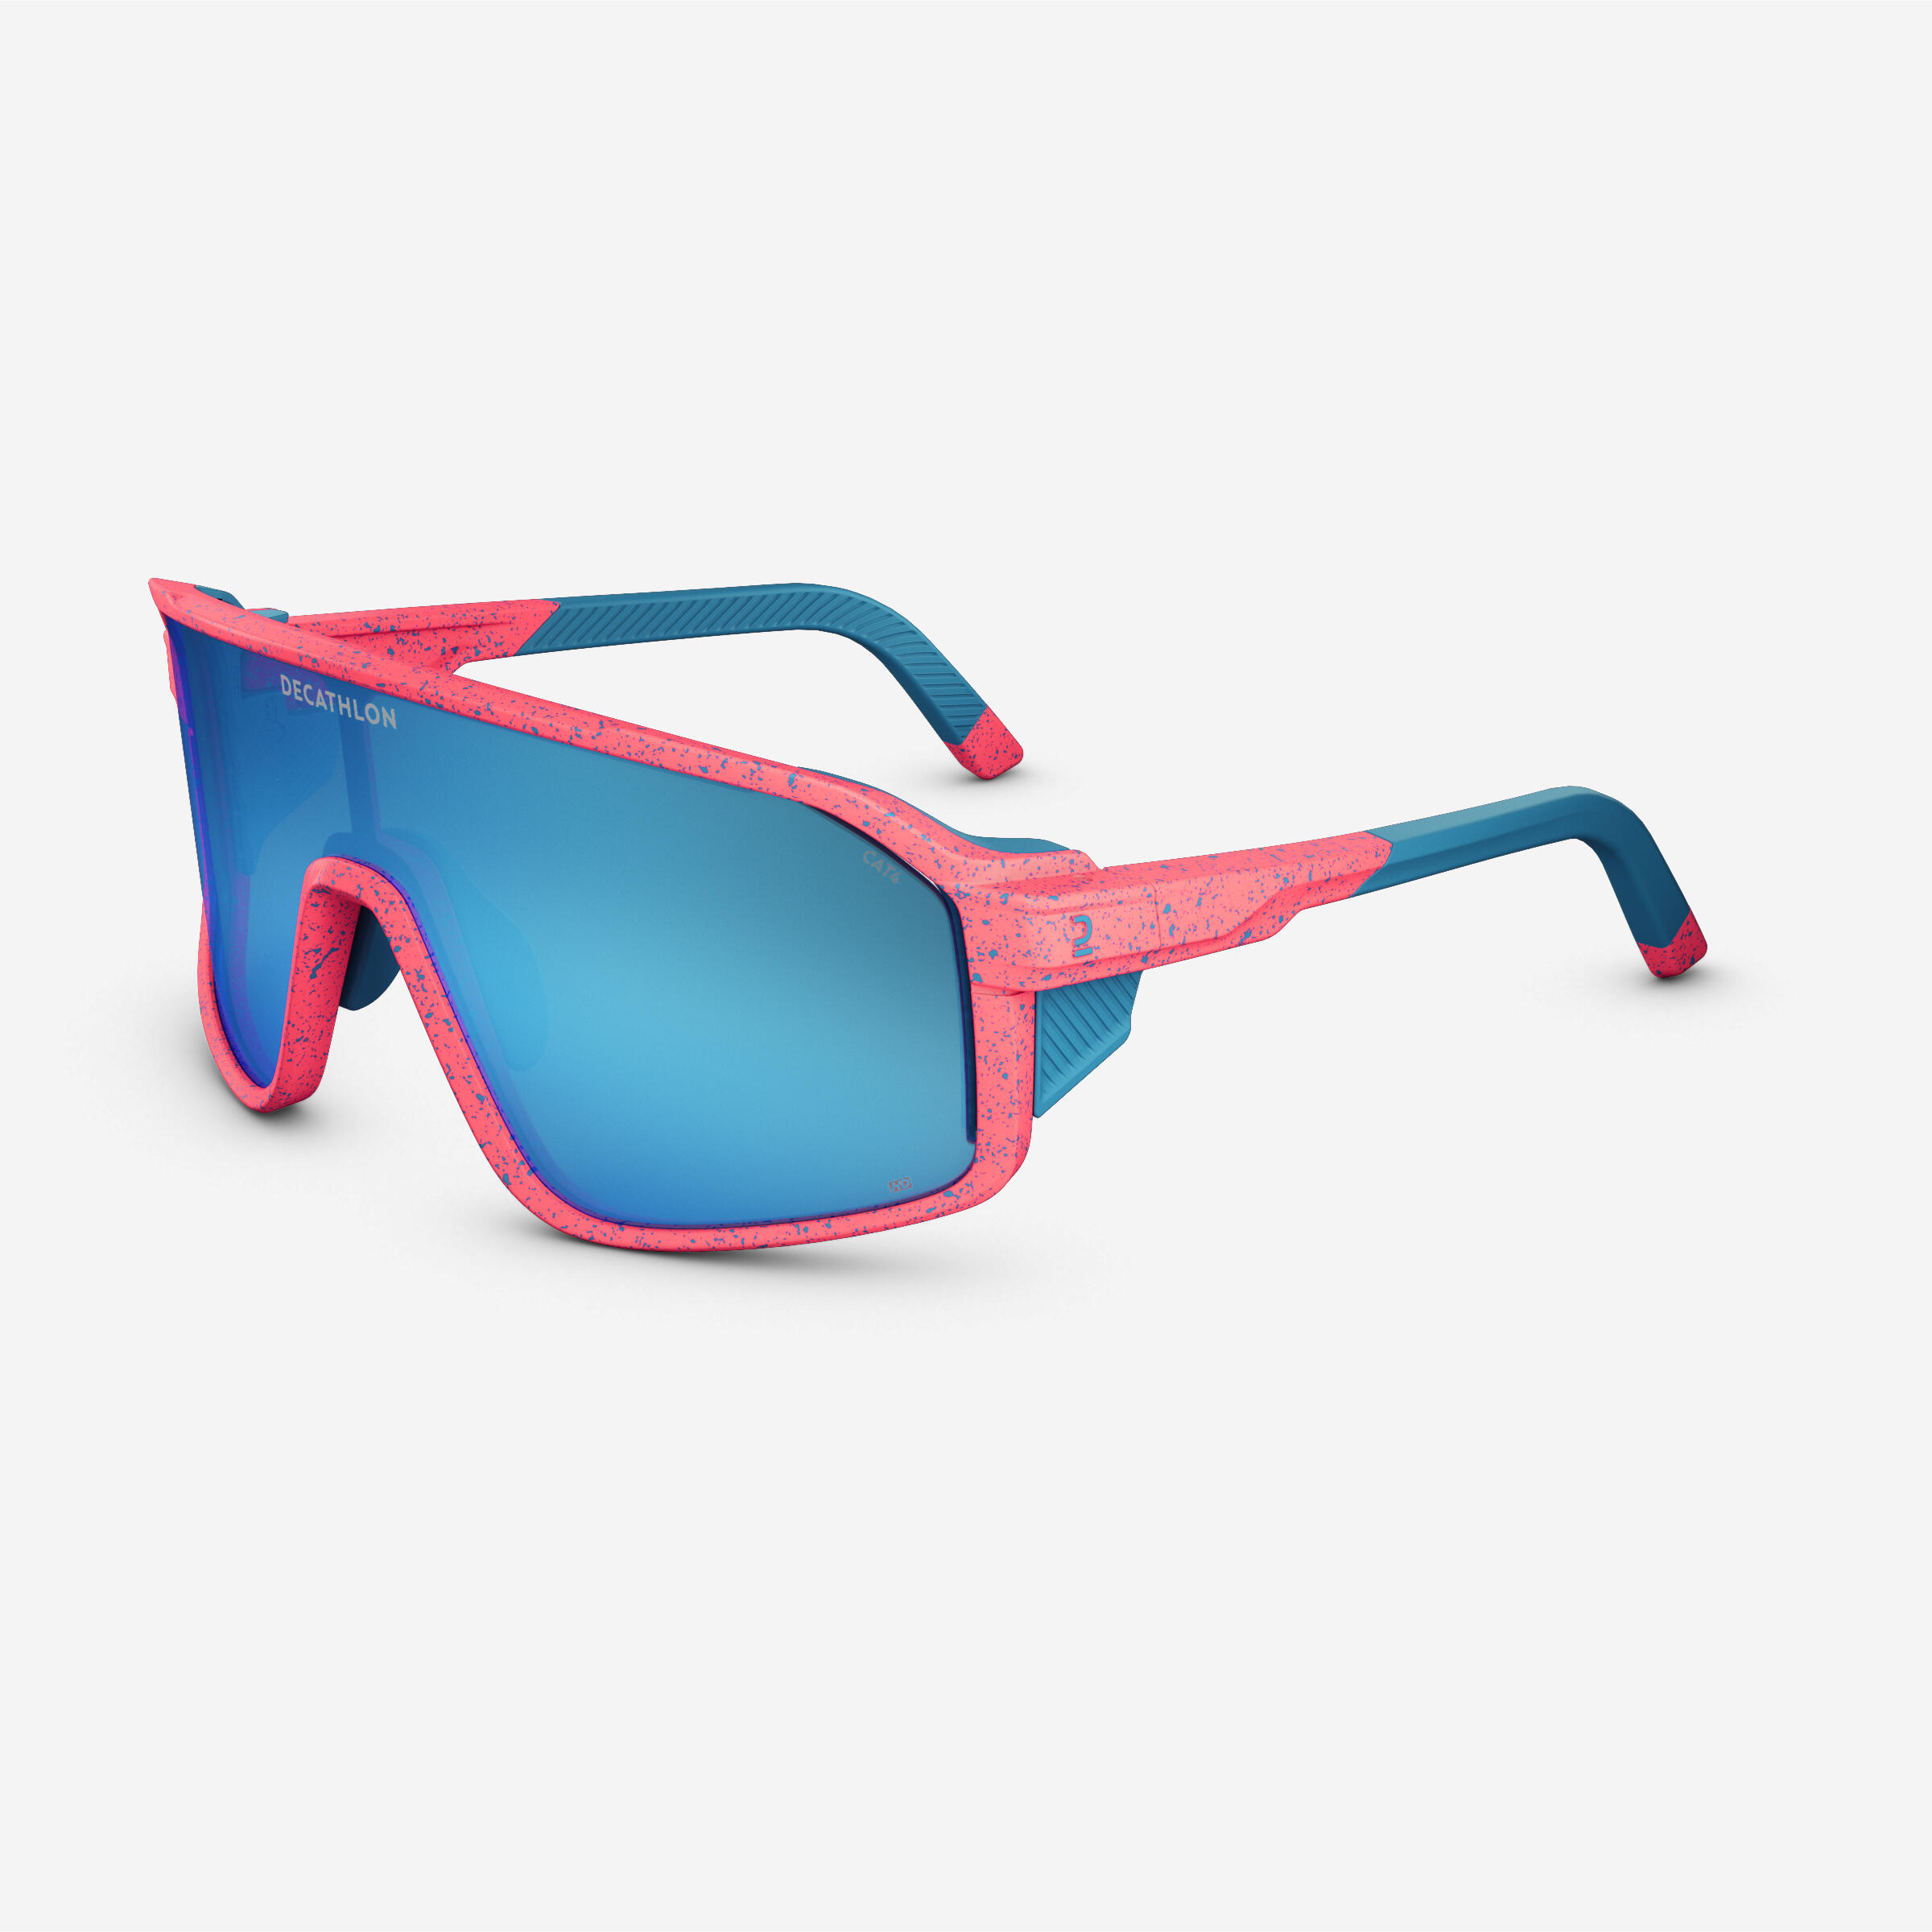 SUNGLASSES MH900 Category 4 Full LENS High Definition - Pink 1/9